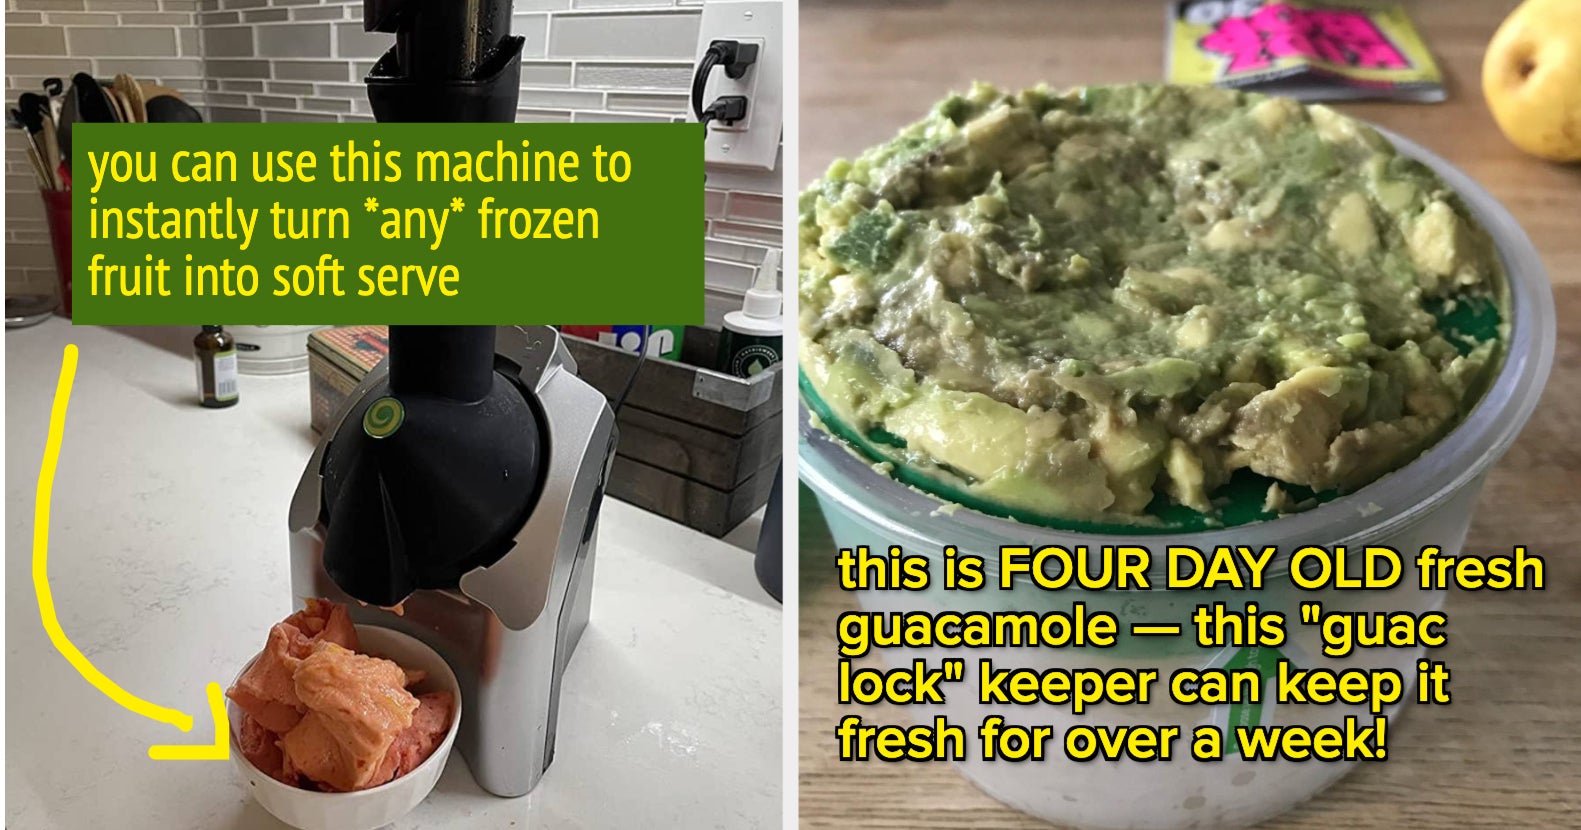 Pampered Chef - Having trouble digging into that delicious avocado